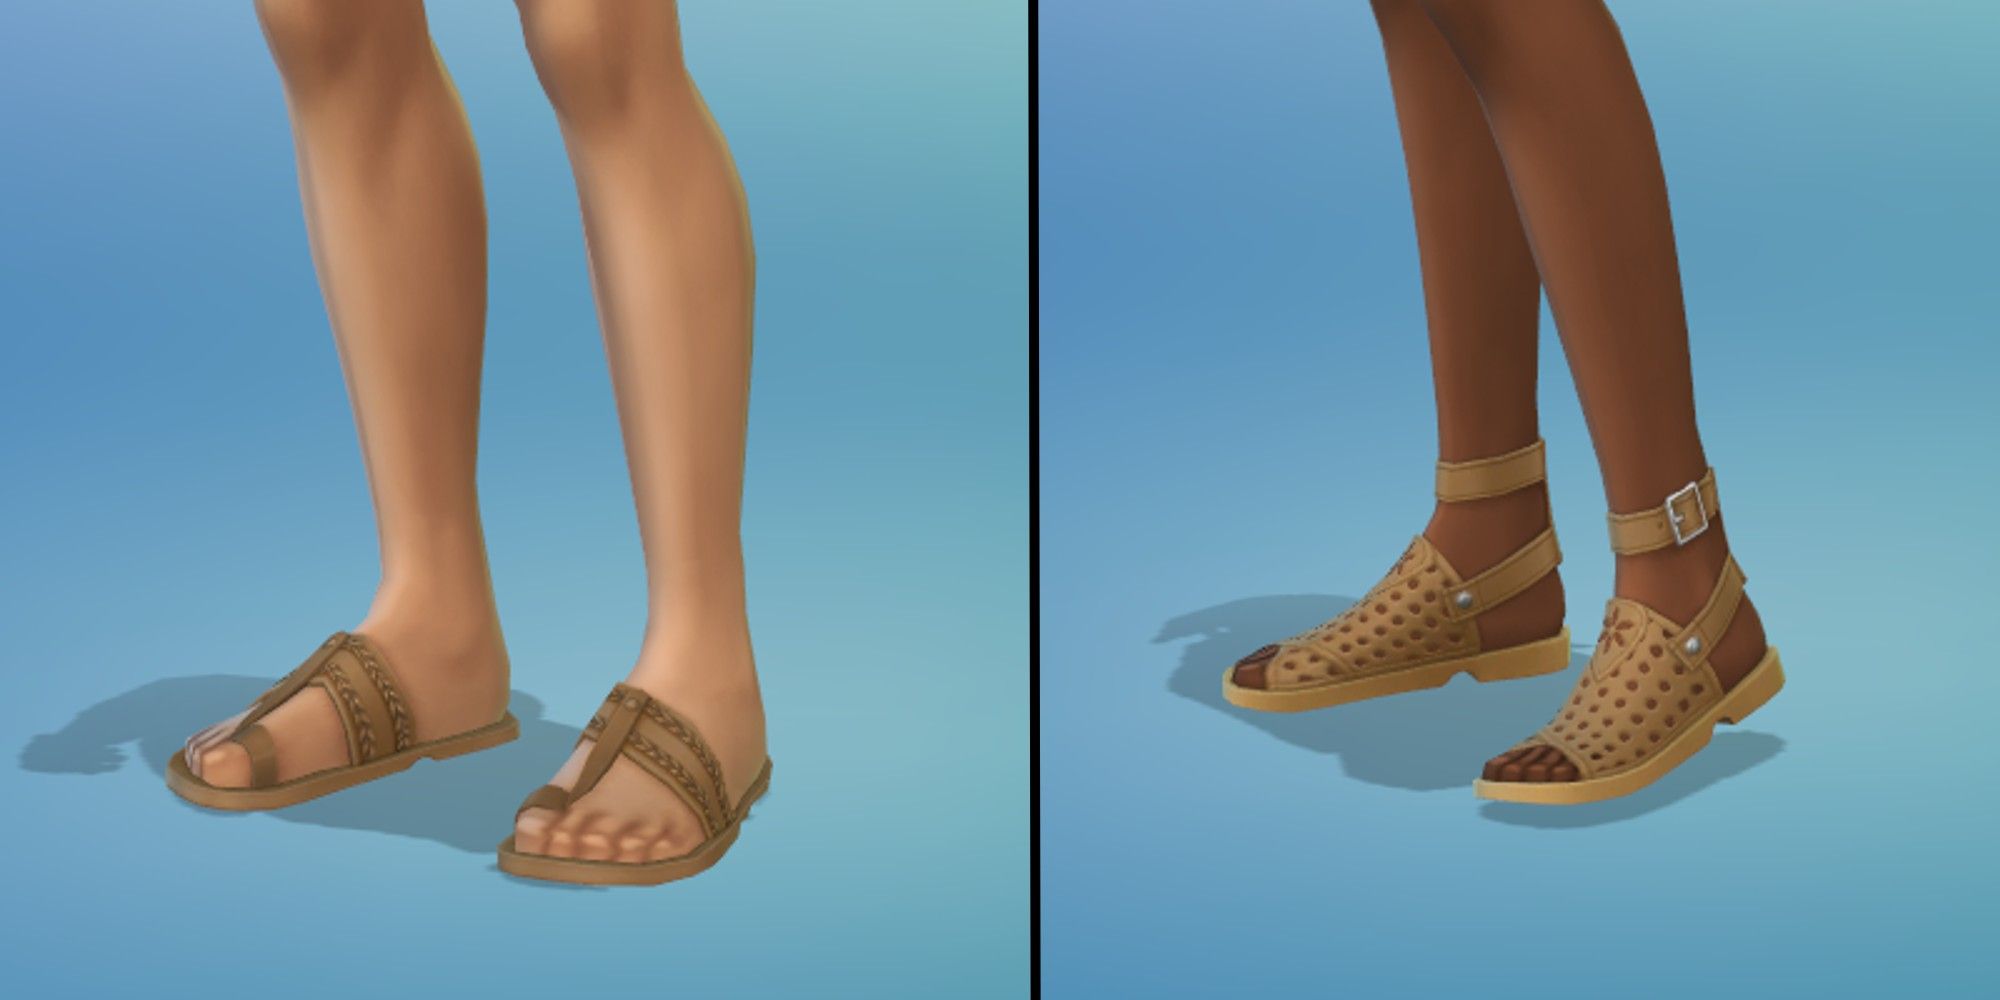 Sims 4: Fashion Steet Kit, Unisex Shoes with default swatches, in the CAS Screen